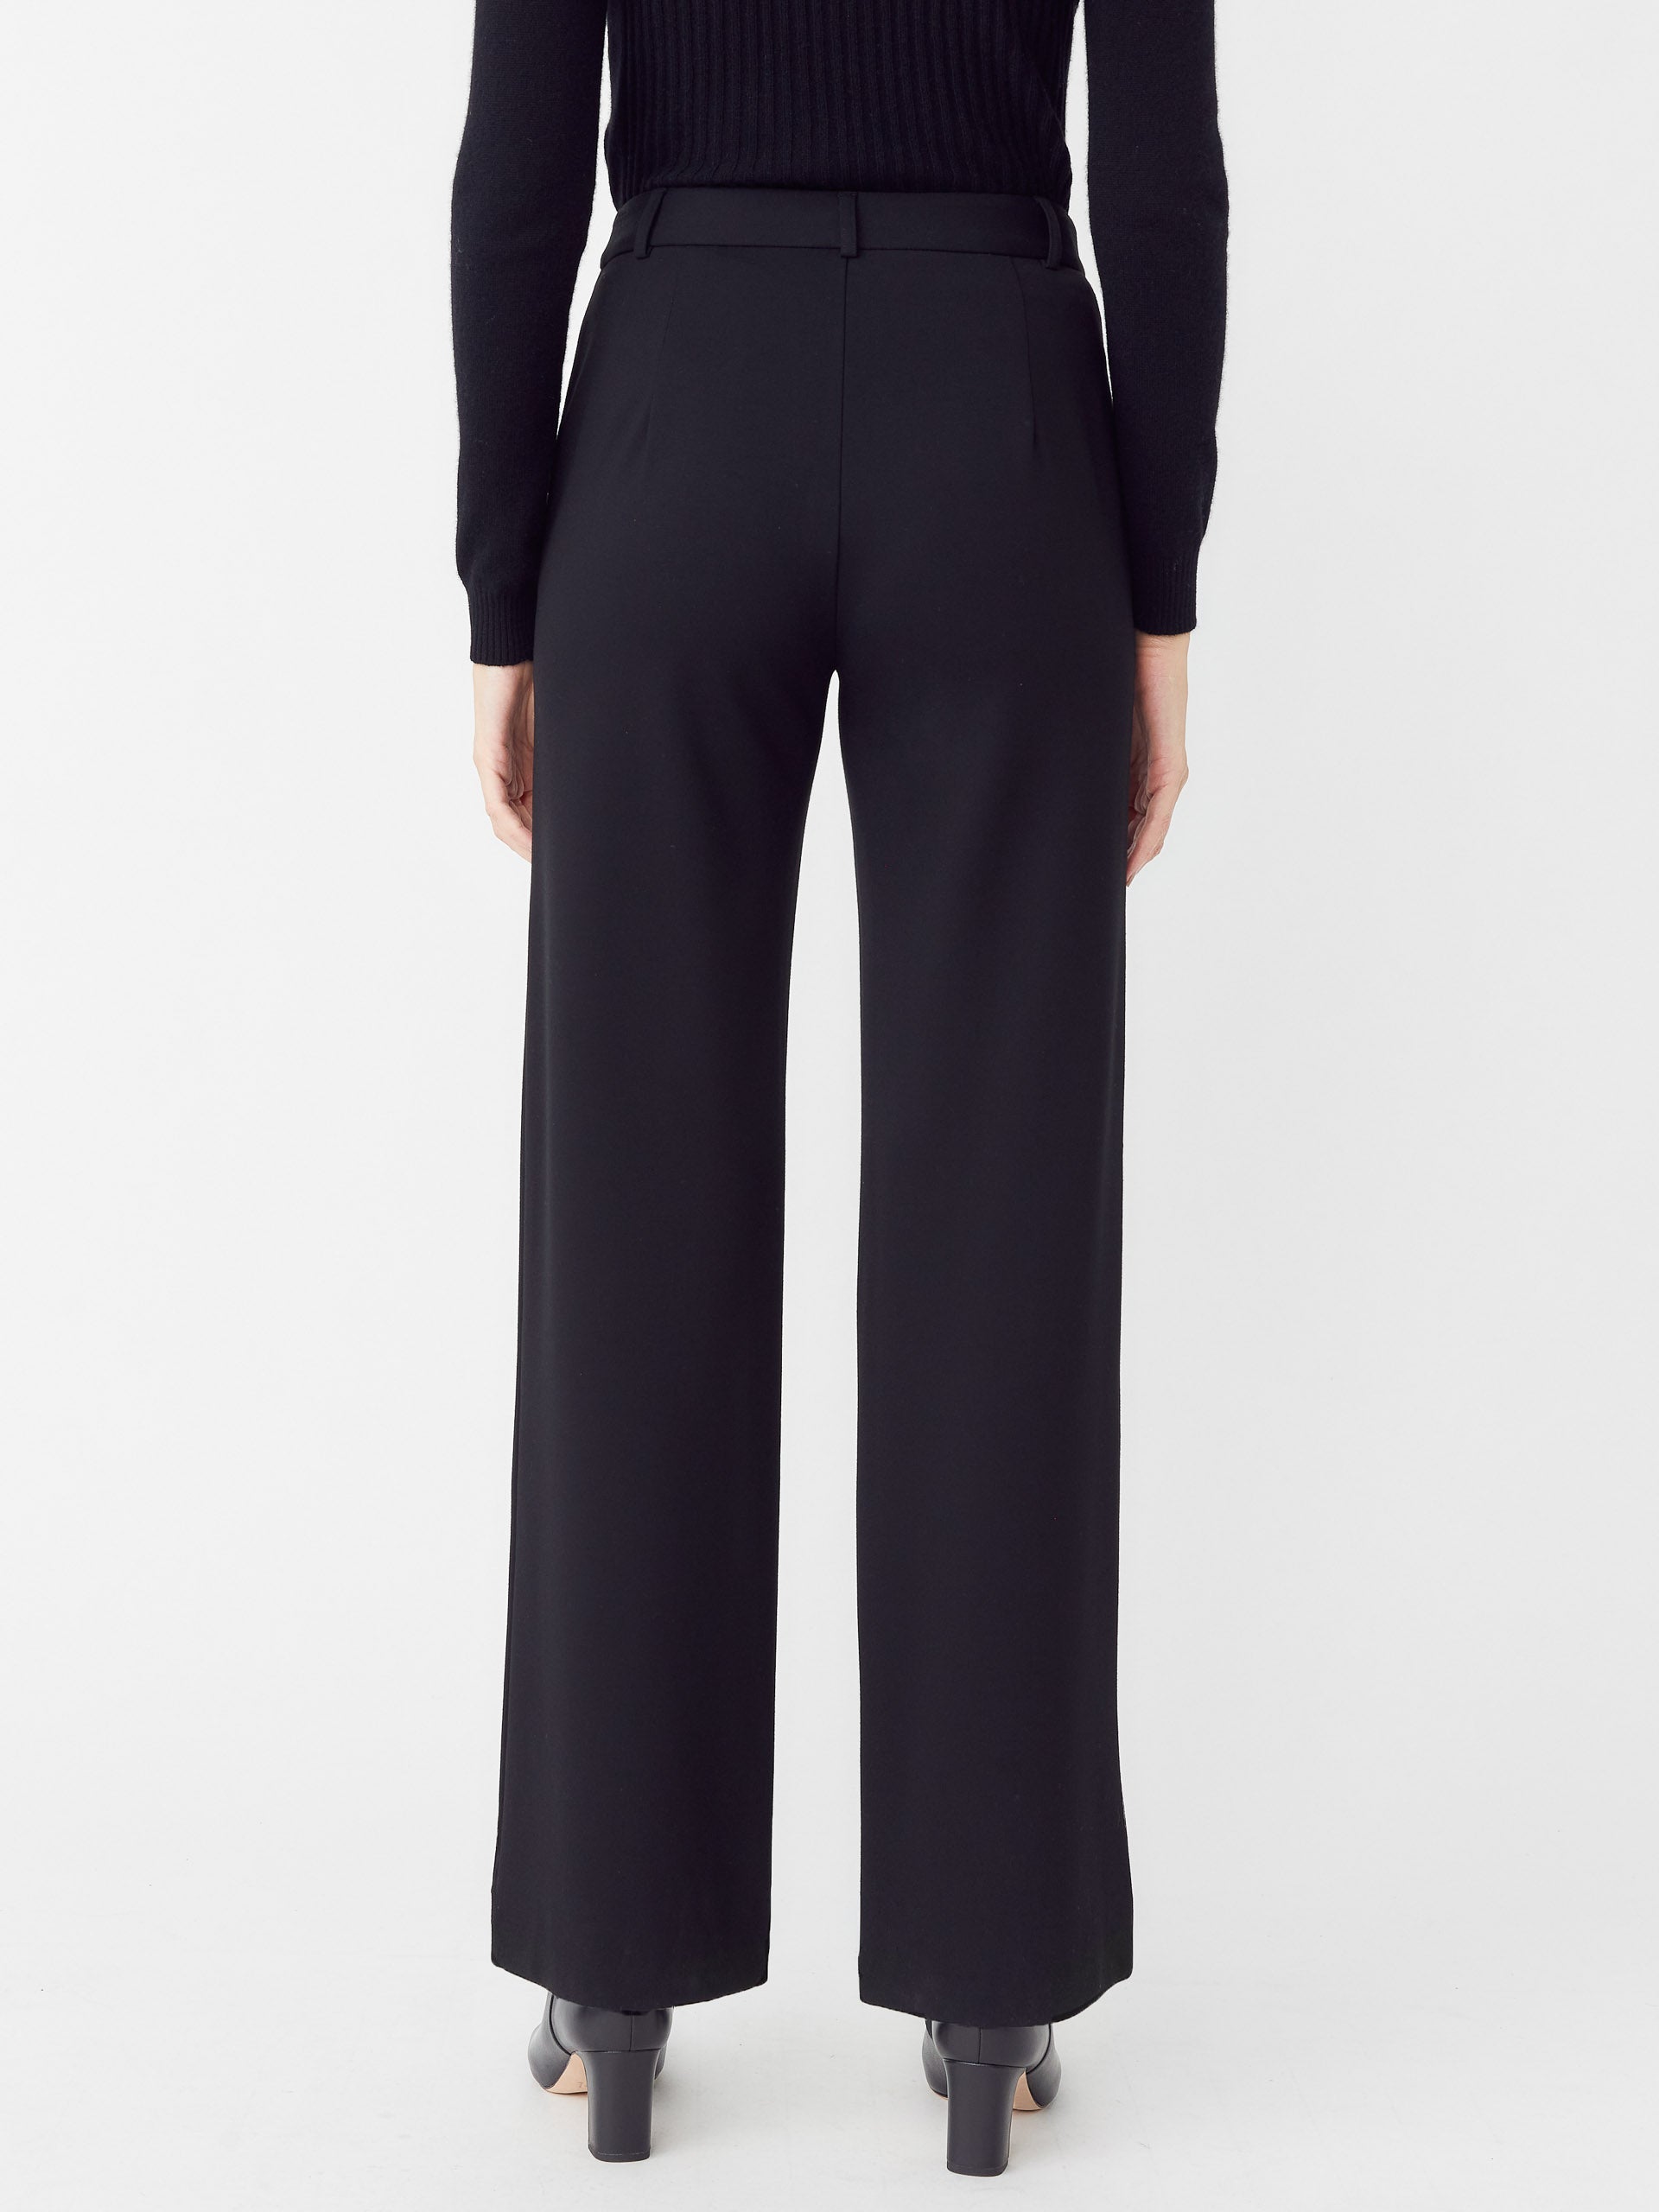 Leather Split Hem Pants by Peter Som Collective for $45